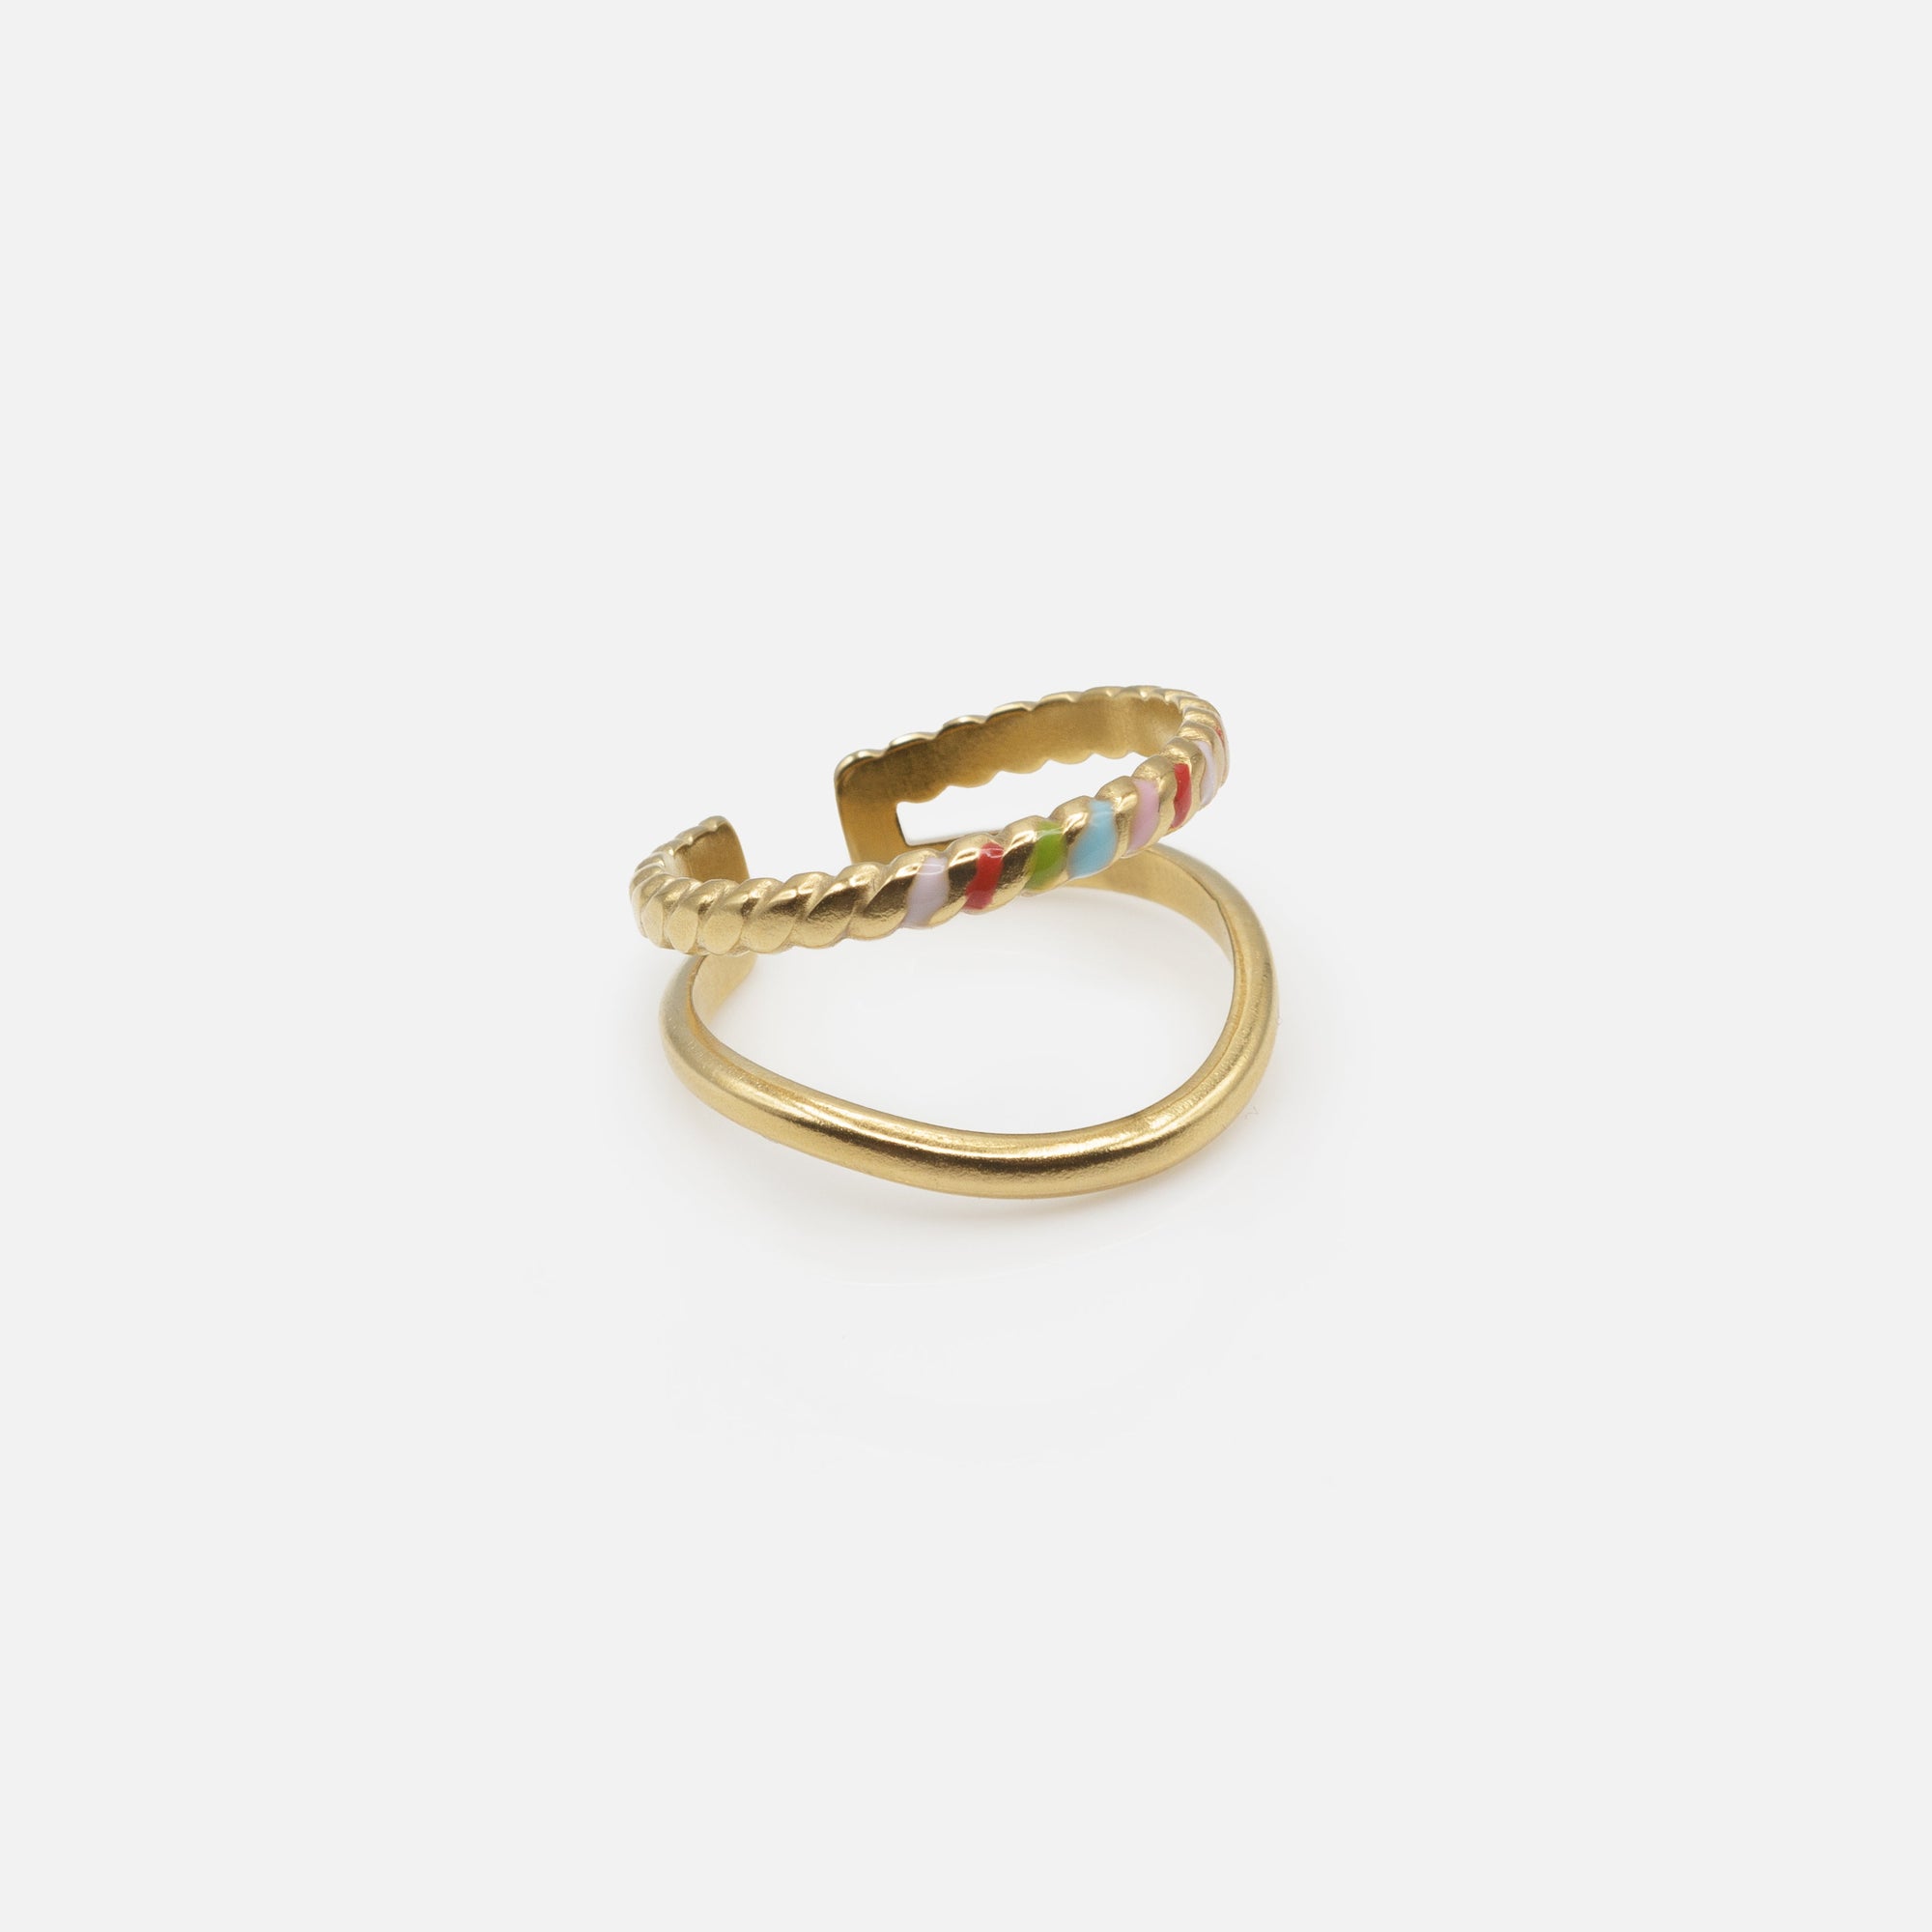 Double gold ring with stainless steel color additions